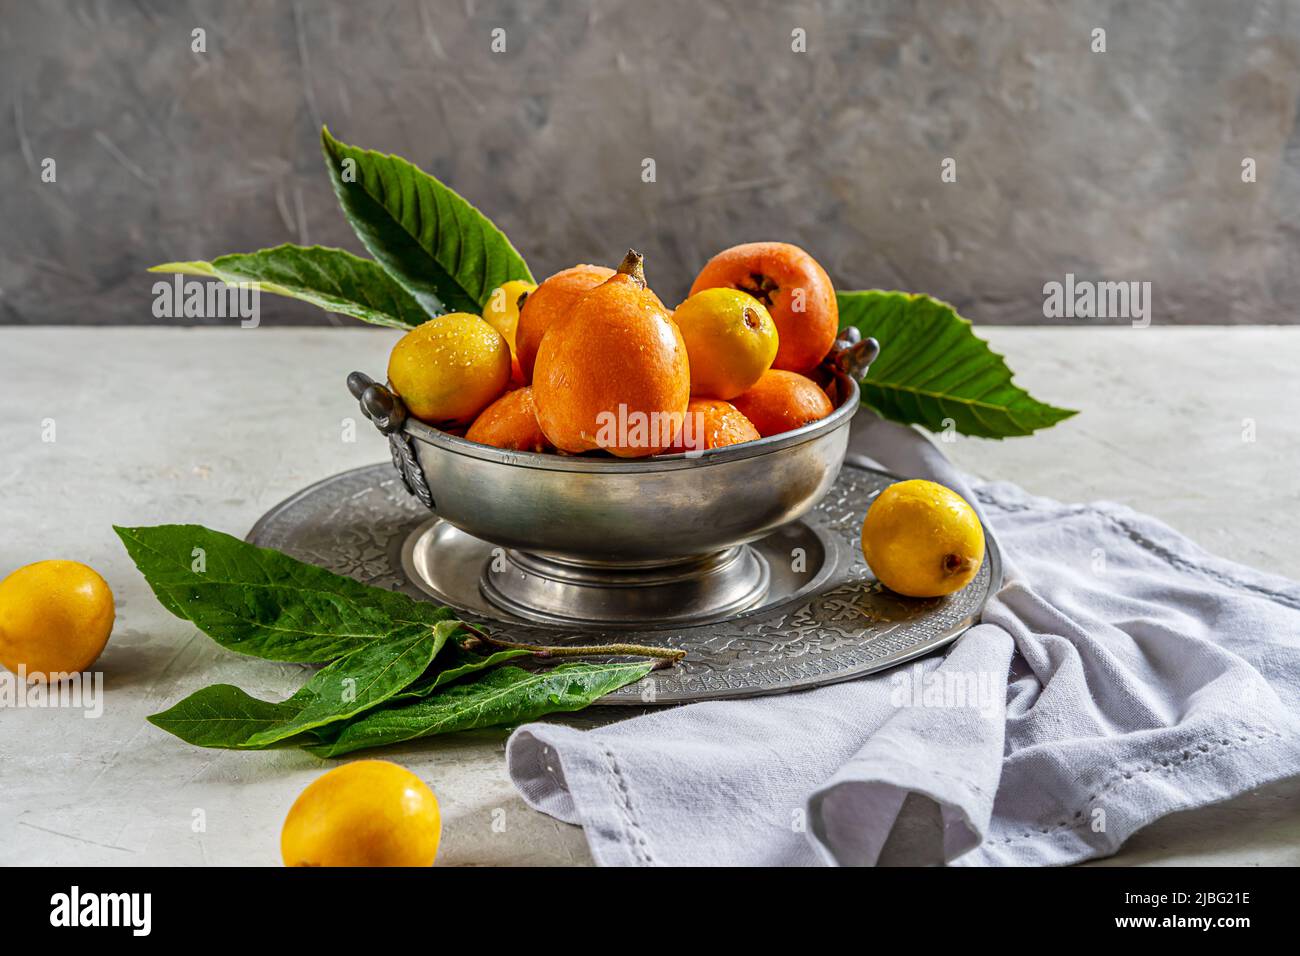 Medlar fruits on antique tin bowl and plate with leaves over concrete background, grey napkin.  Stock Photo